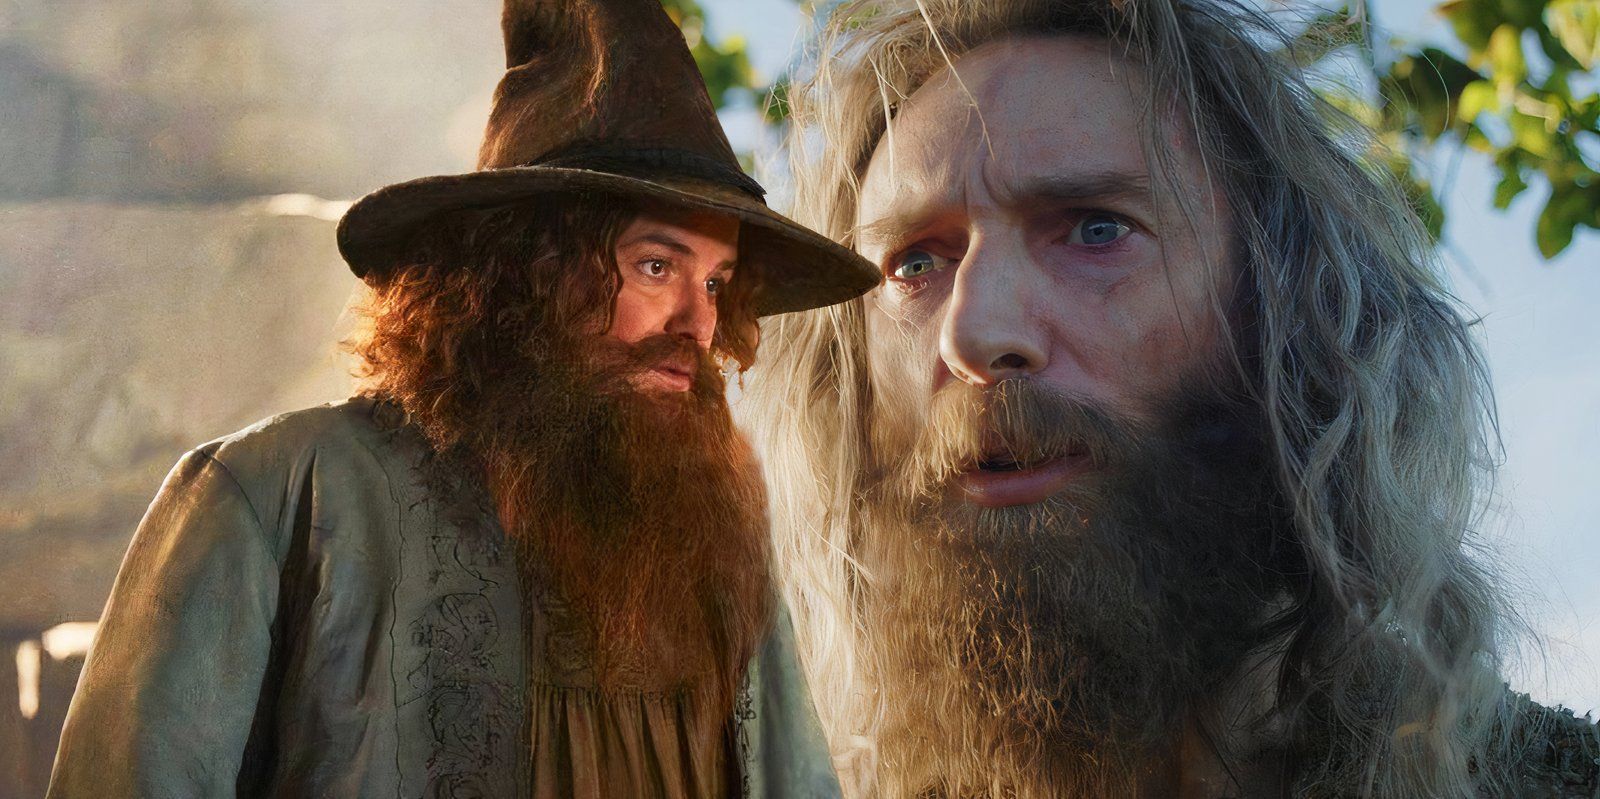 How Season 2 of “Rings of Power” faithfully recreates Tolkien’s LOTR book character Tom Bombadil – showrunners have teased it